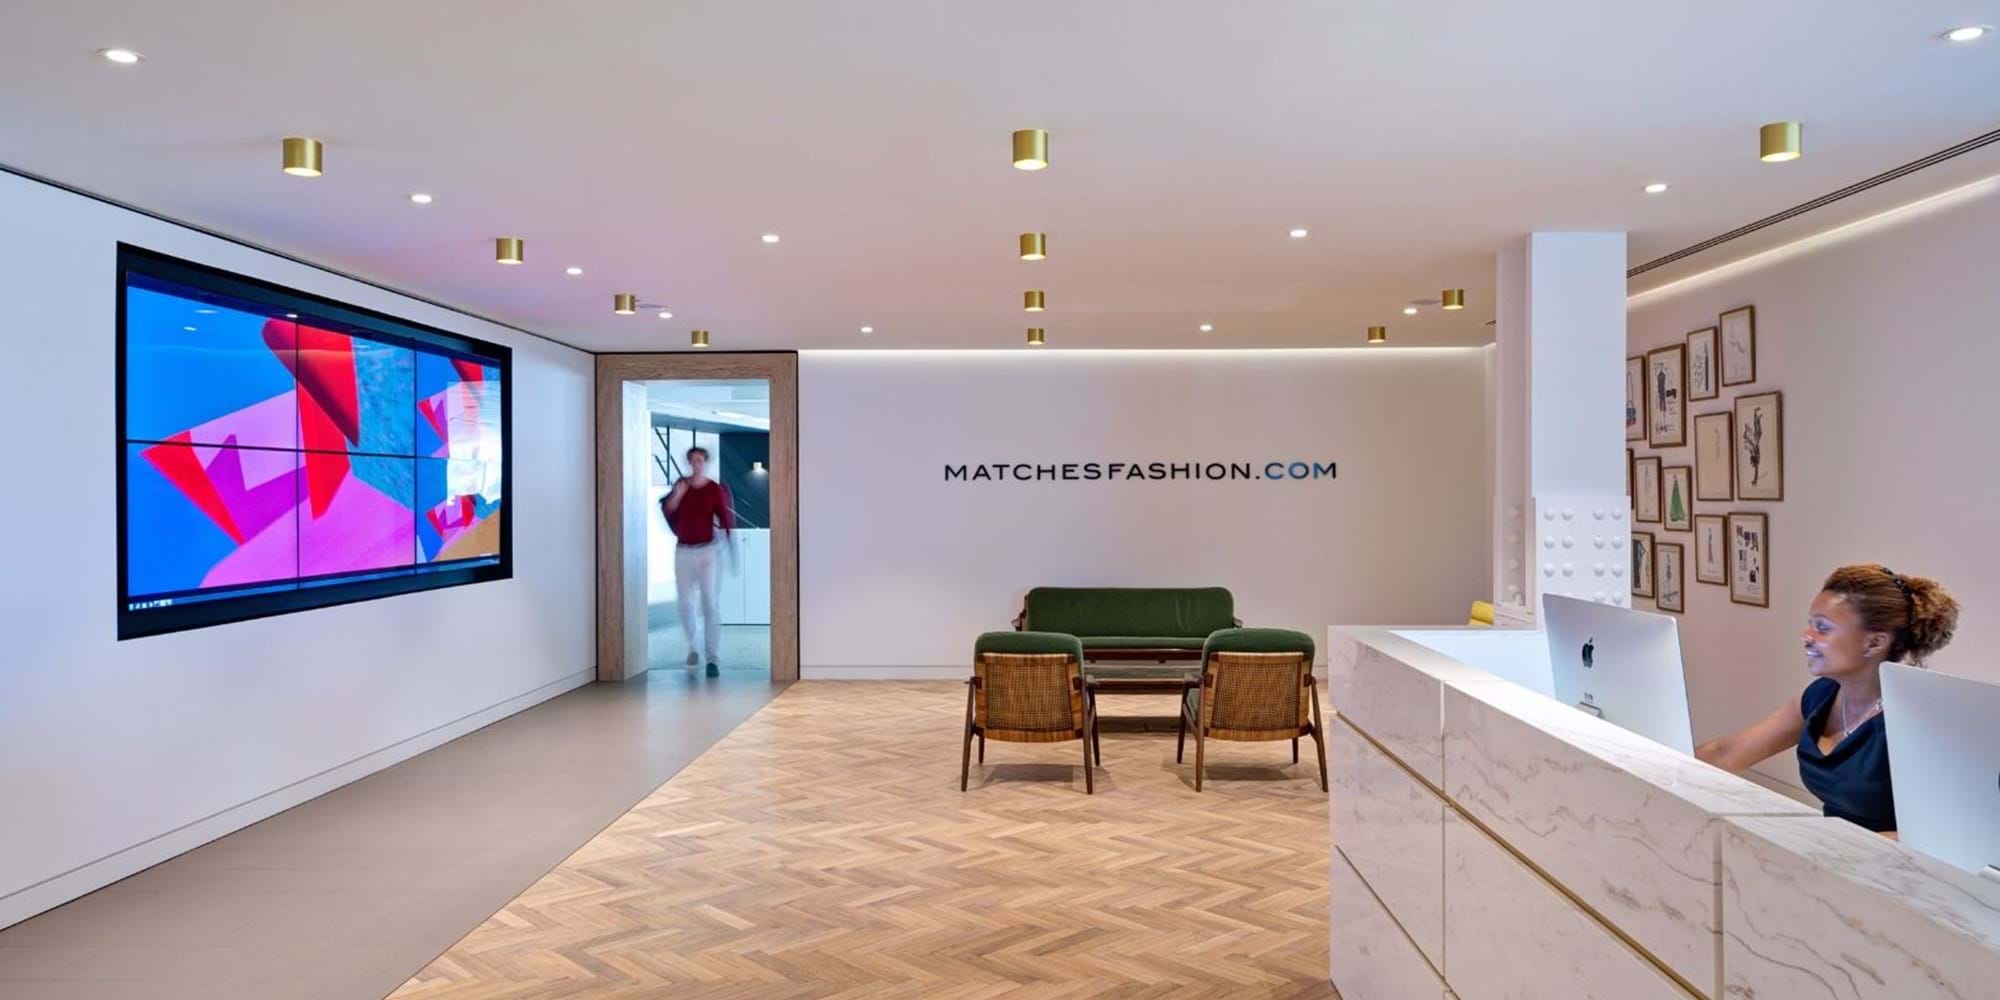 Modus Workspace office design, fit out and refurbishment - Matches Fashion - The Shard, London - Matches Fashion 18 bis highres sRGB.jpg